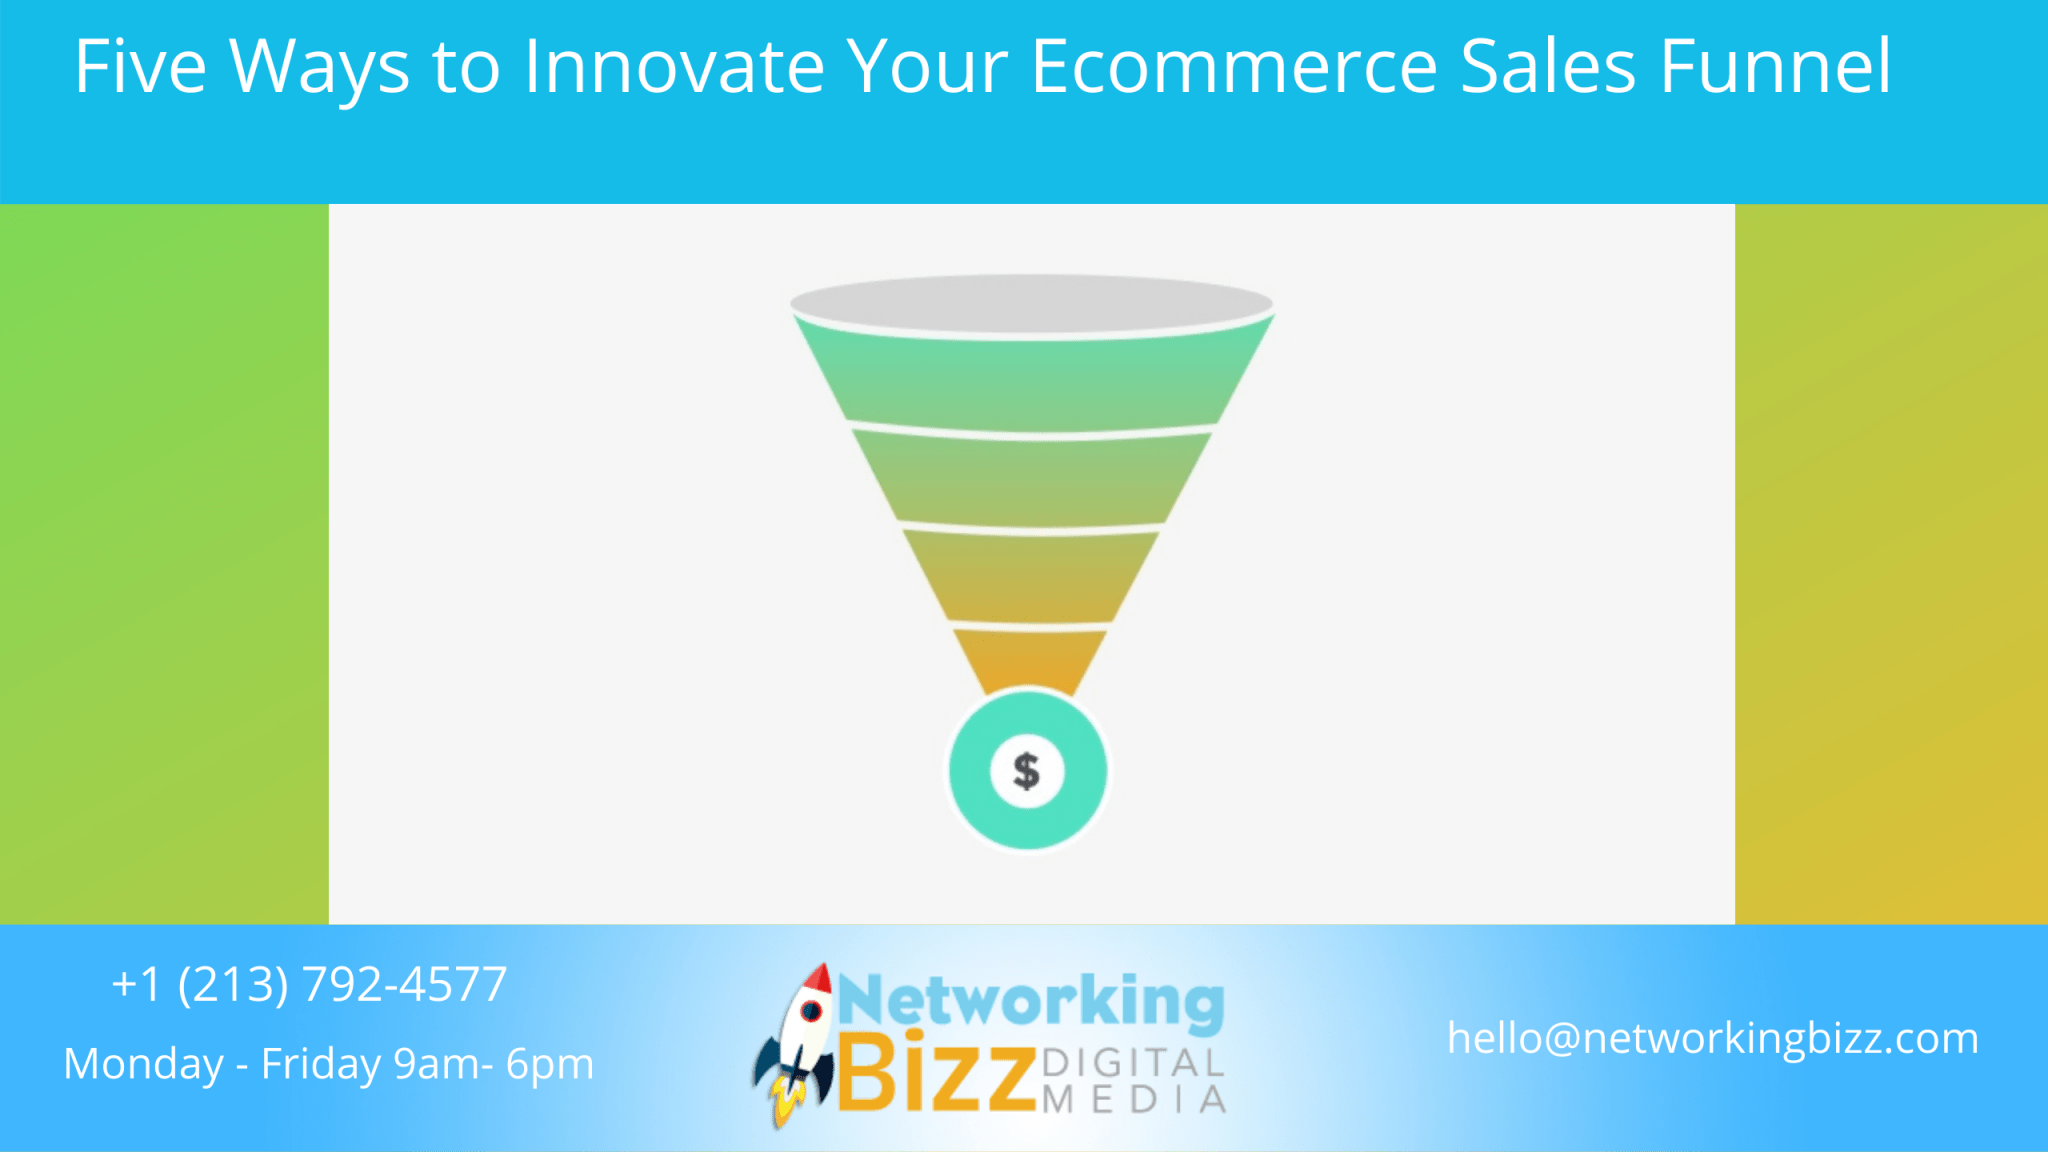 Five Ways to Innovate Your Ecommerce Sales Funnel